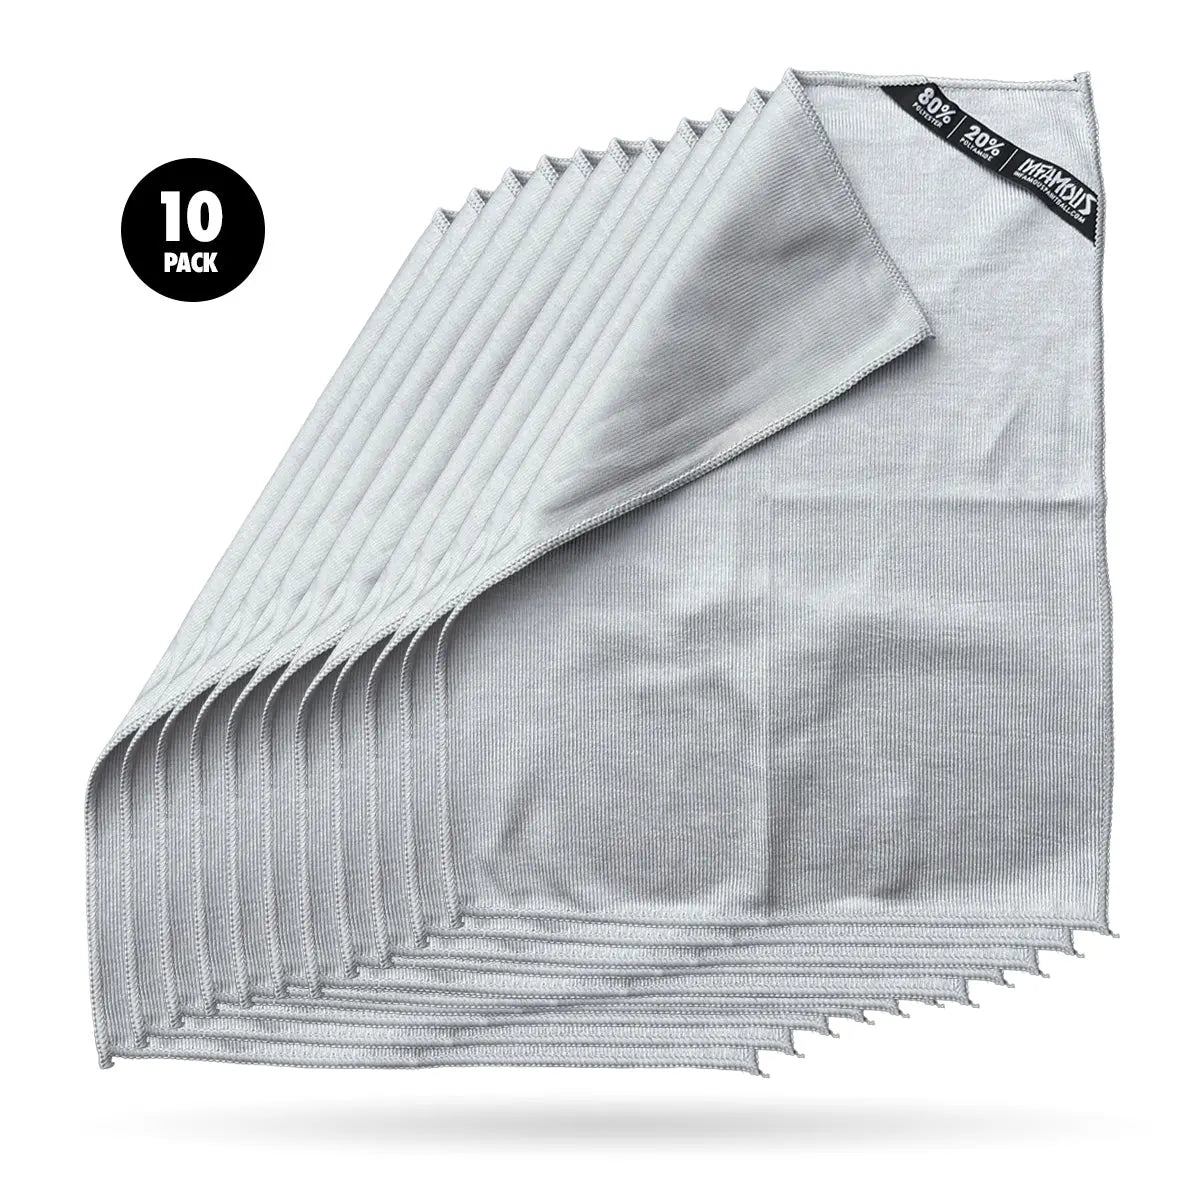 Microfiber - The Holy Grail (10 Pack)